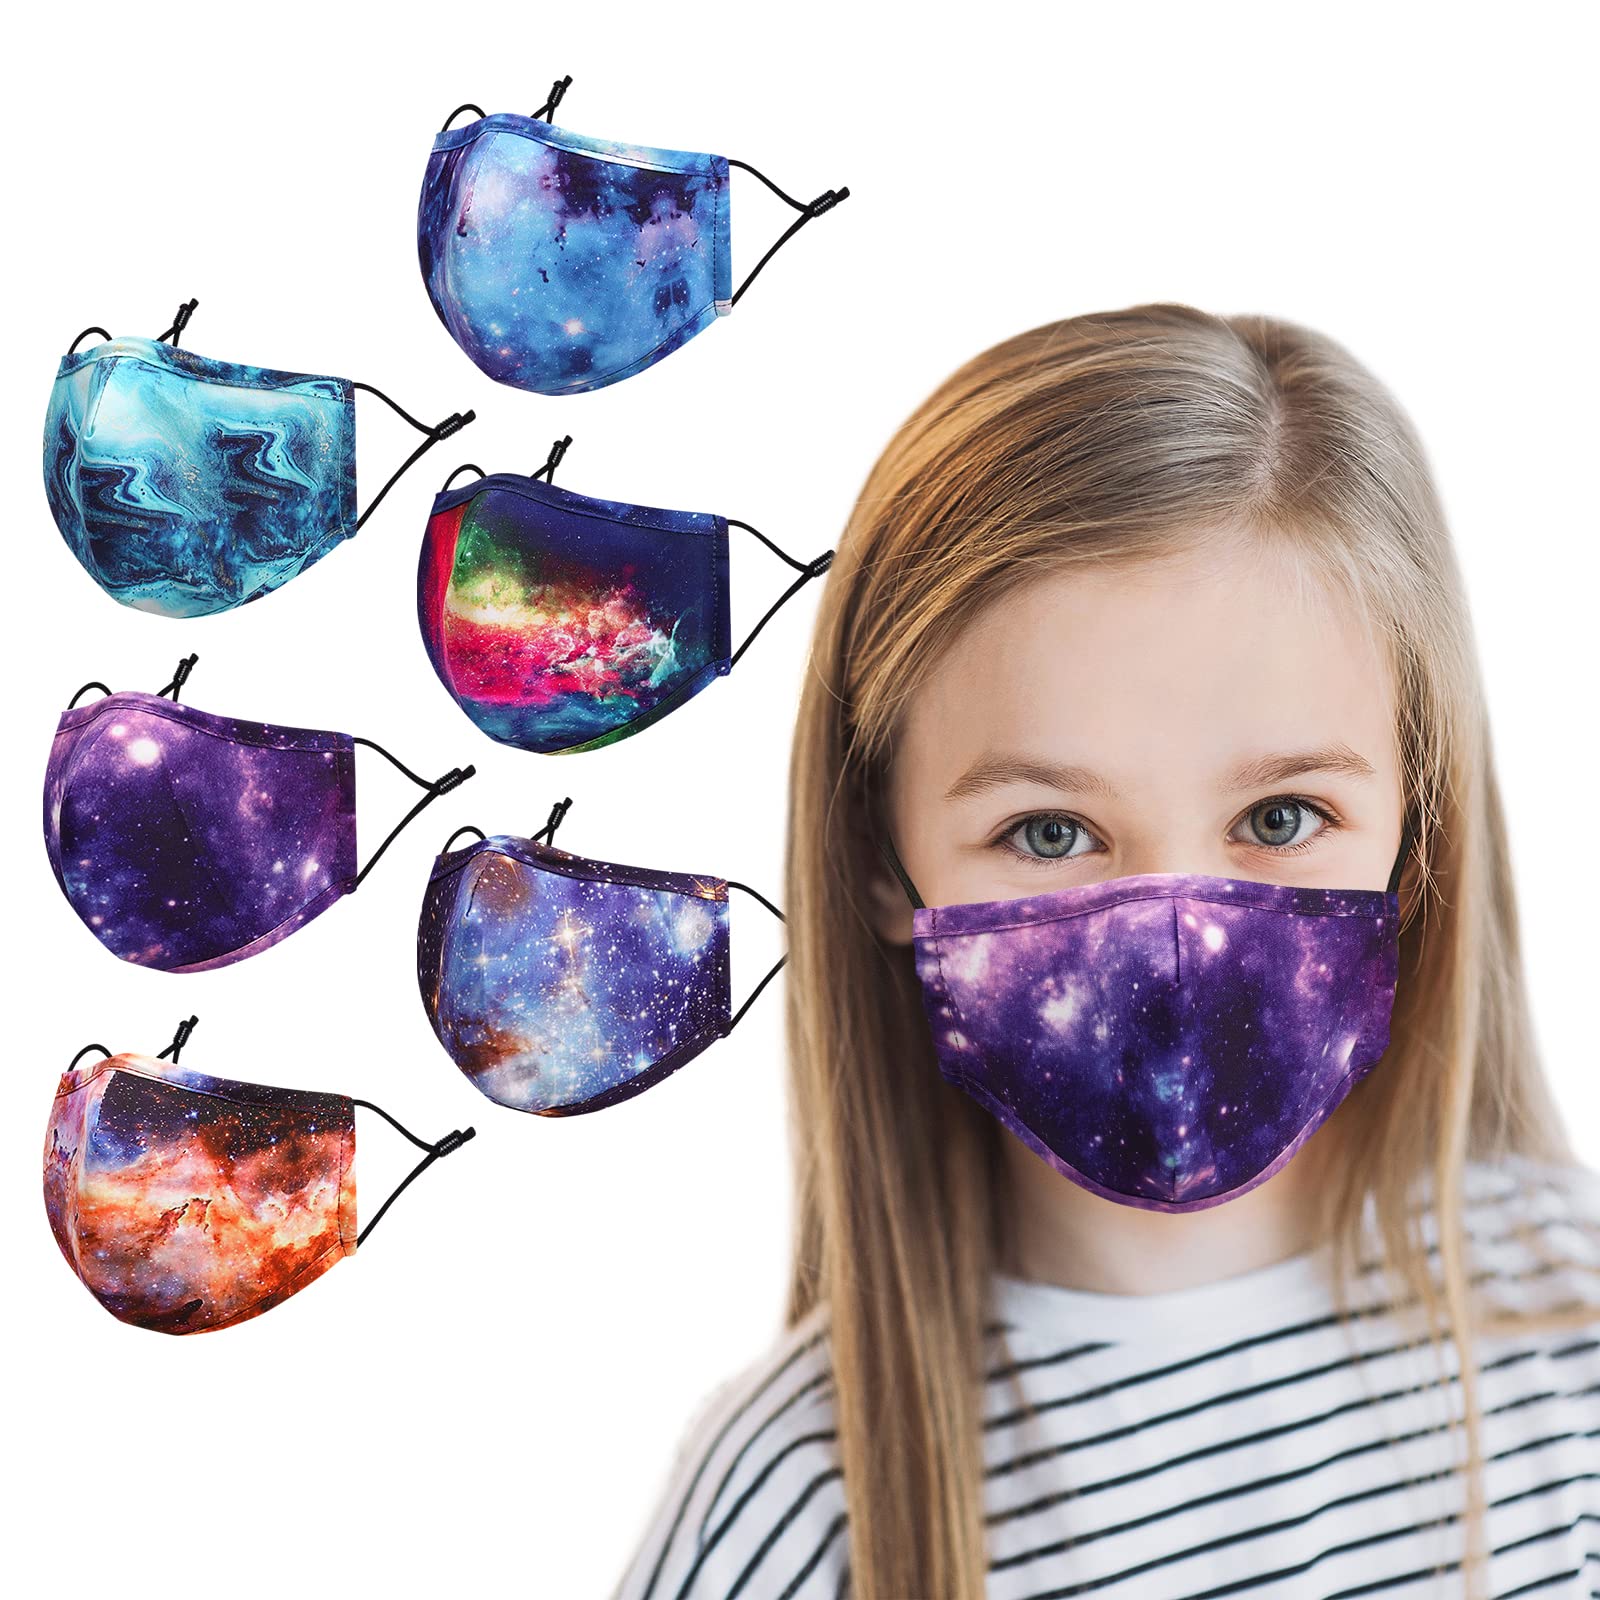 Kids Cloth Face Masks, 3 Ply Reusable Breathable Washable Mask with Adjustable Ear Loops, and Filter Pocket for Boys Girls